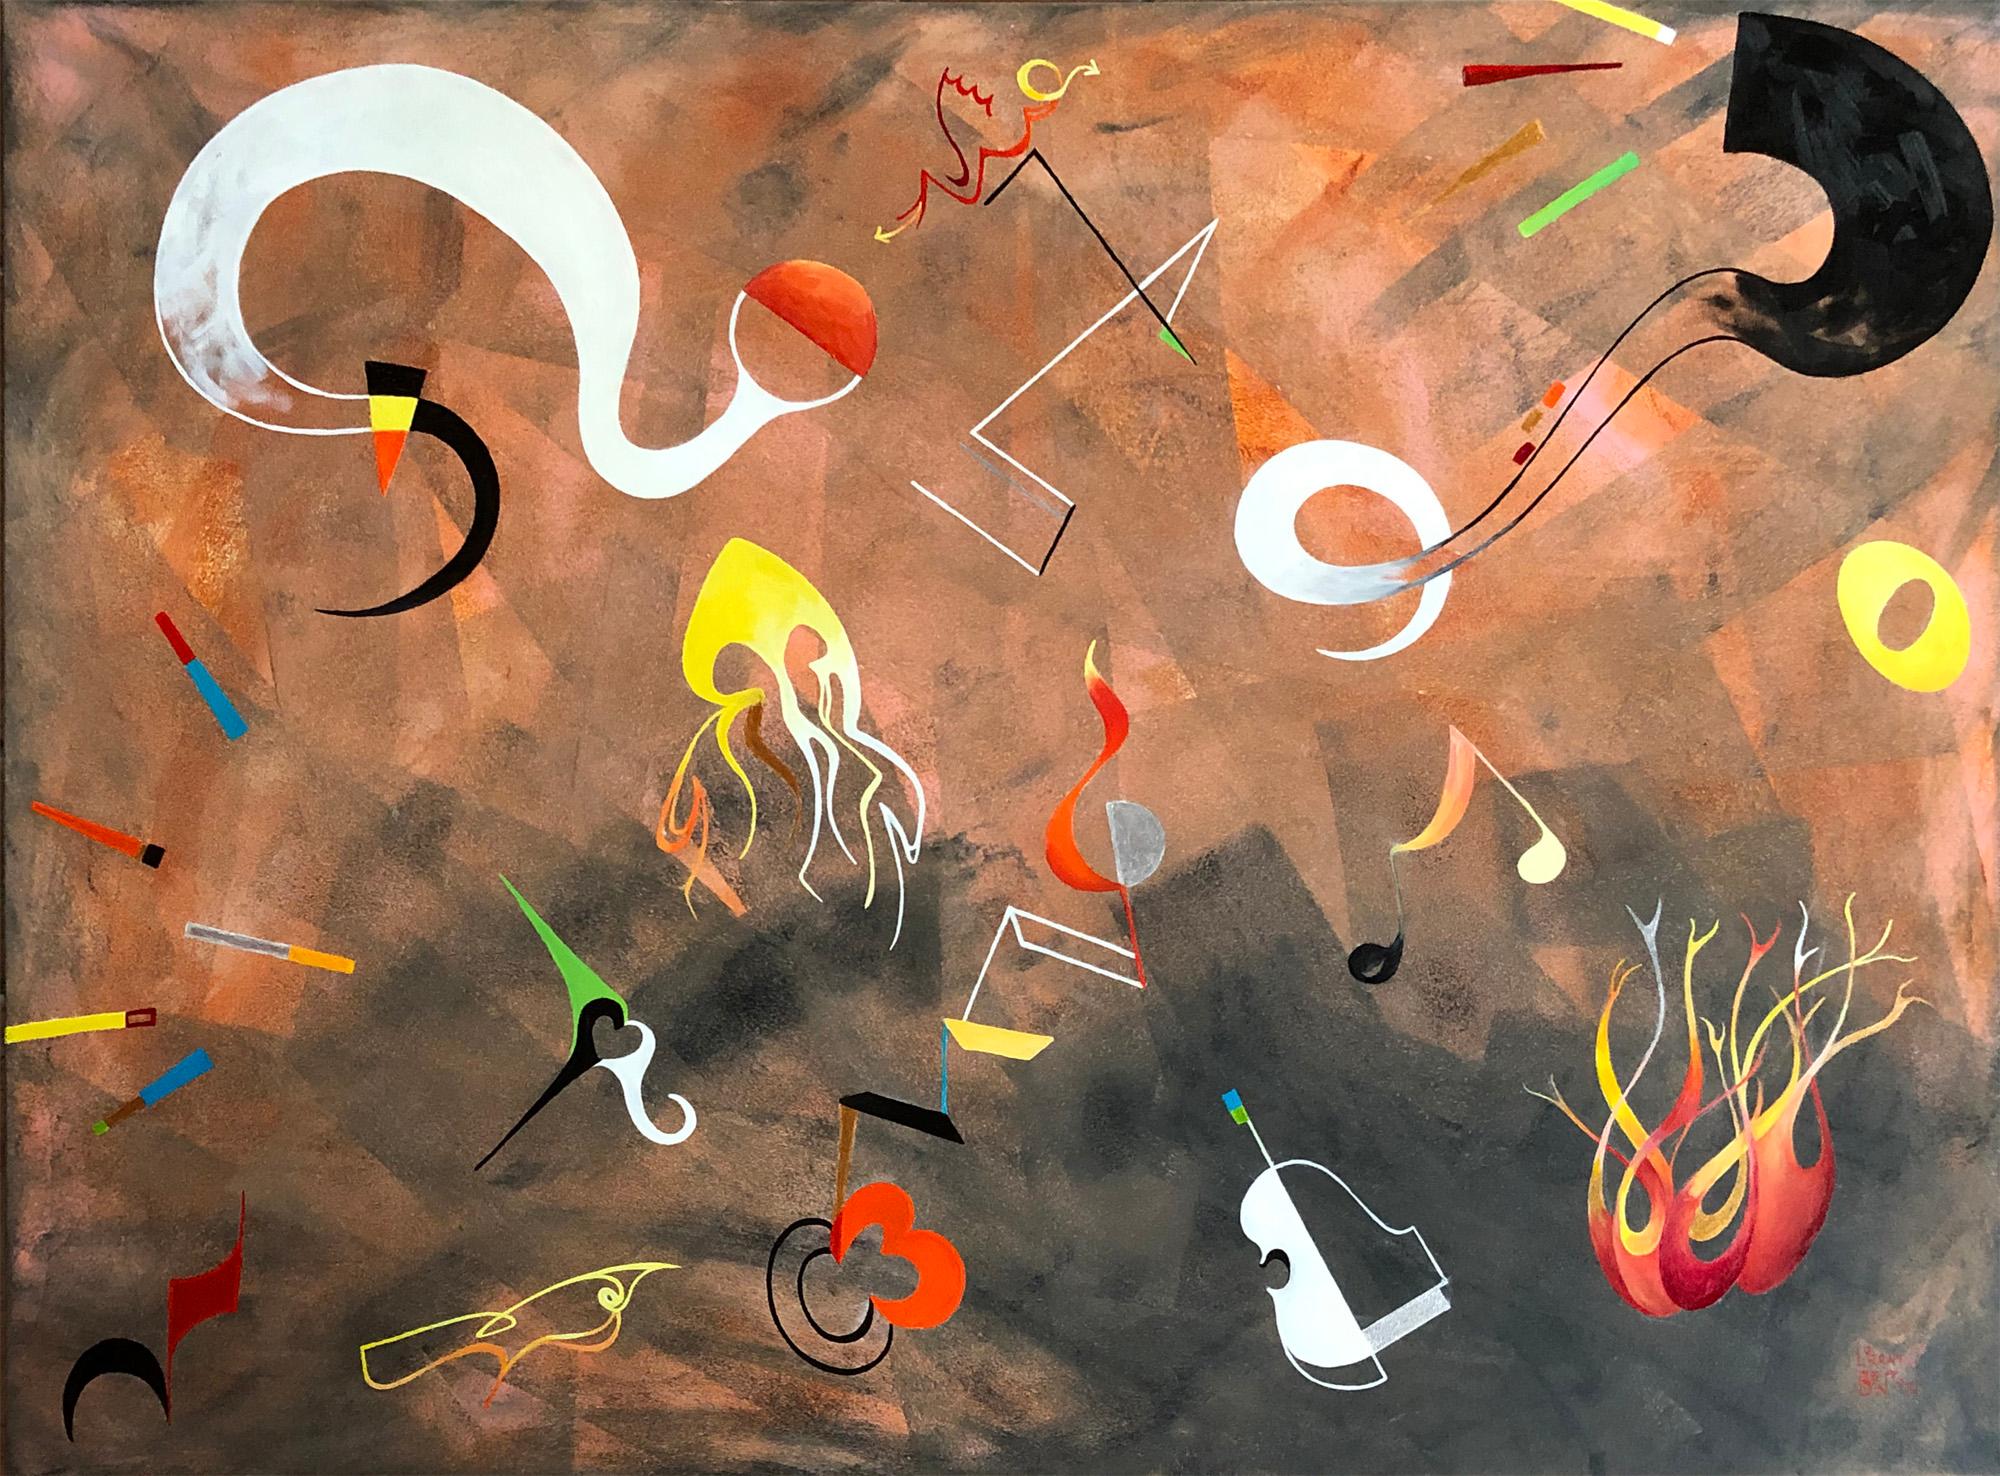 Lorraine Benton Abstract Painting - "Music and Fire"   Contemporary Abstract Mixed Media Painting